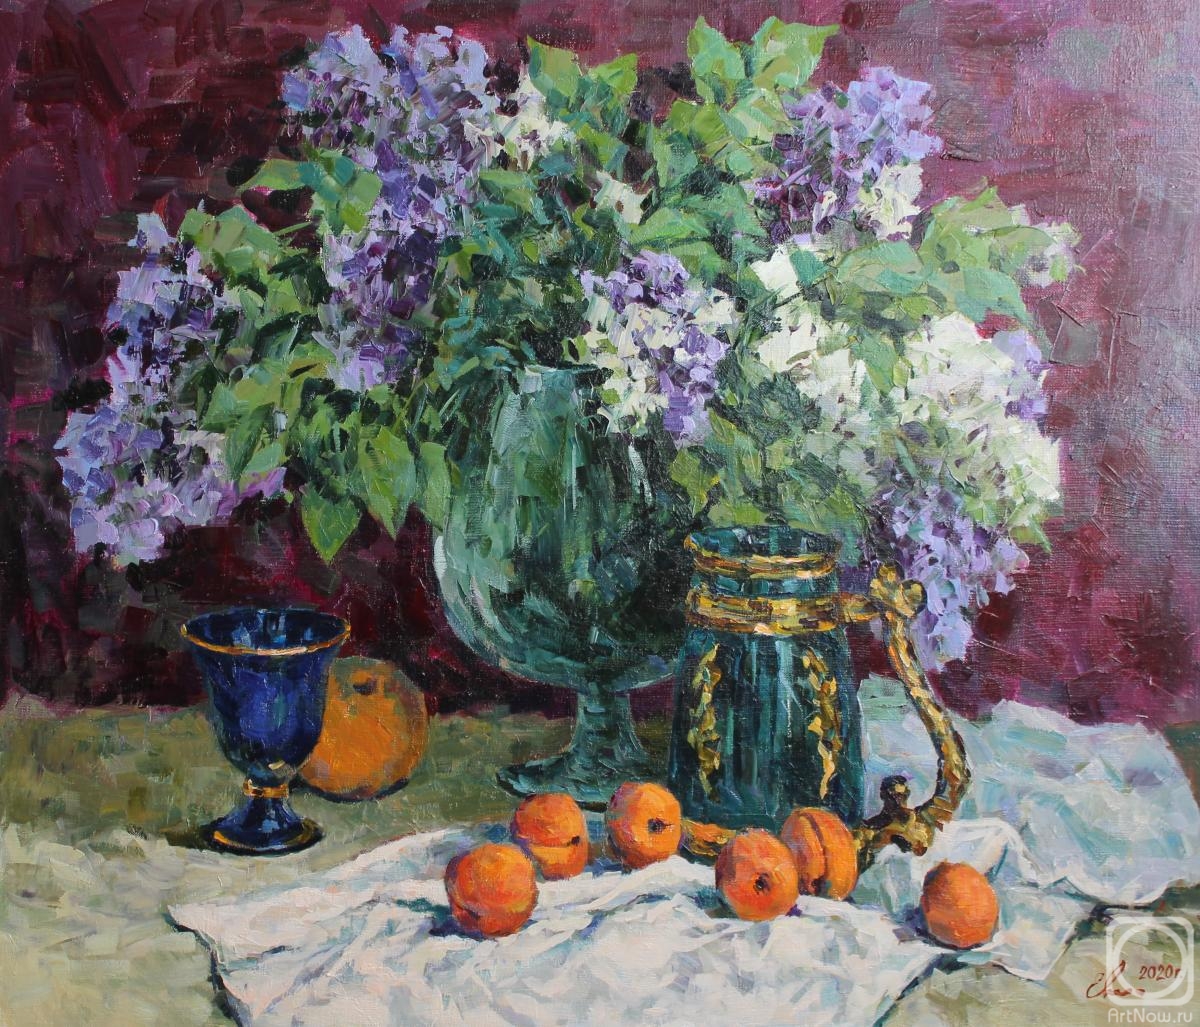 Malykh Evgeny. A bouquet of lilac and fruits